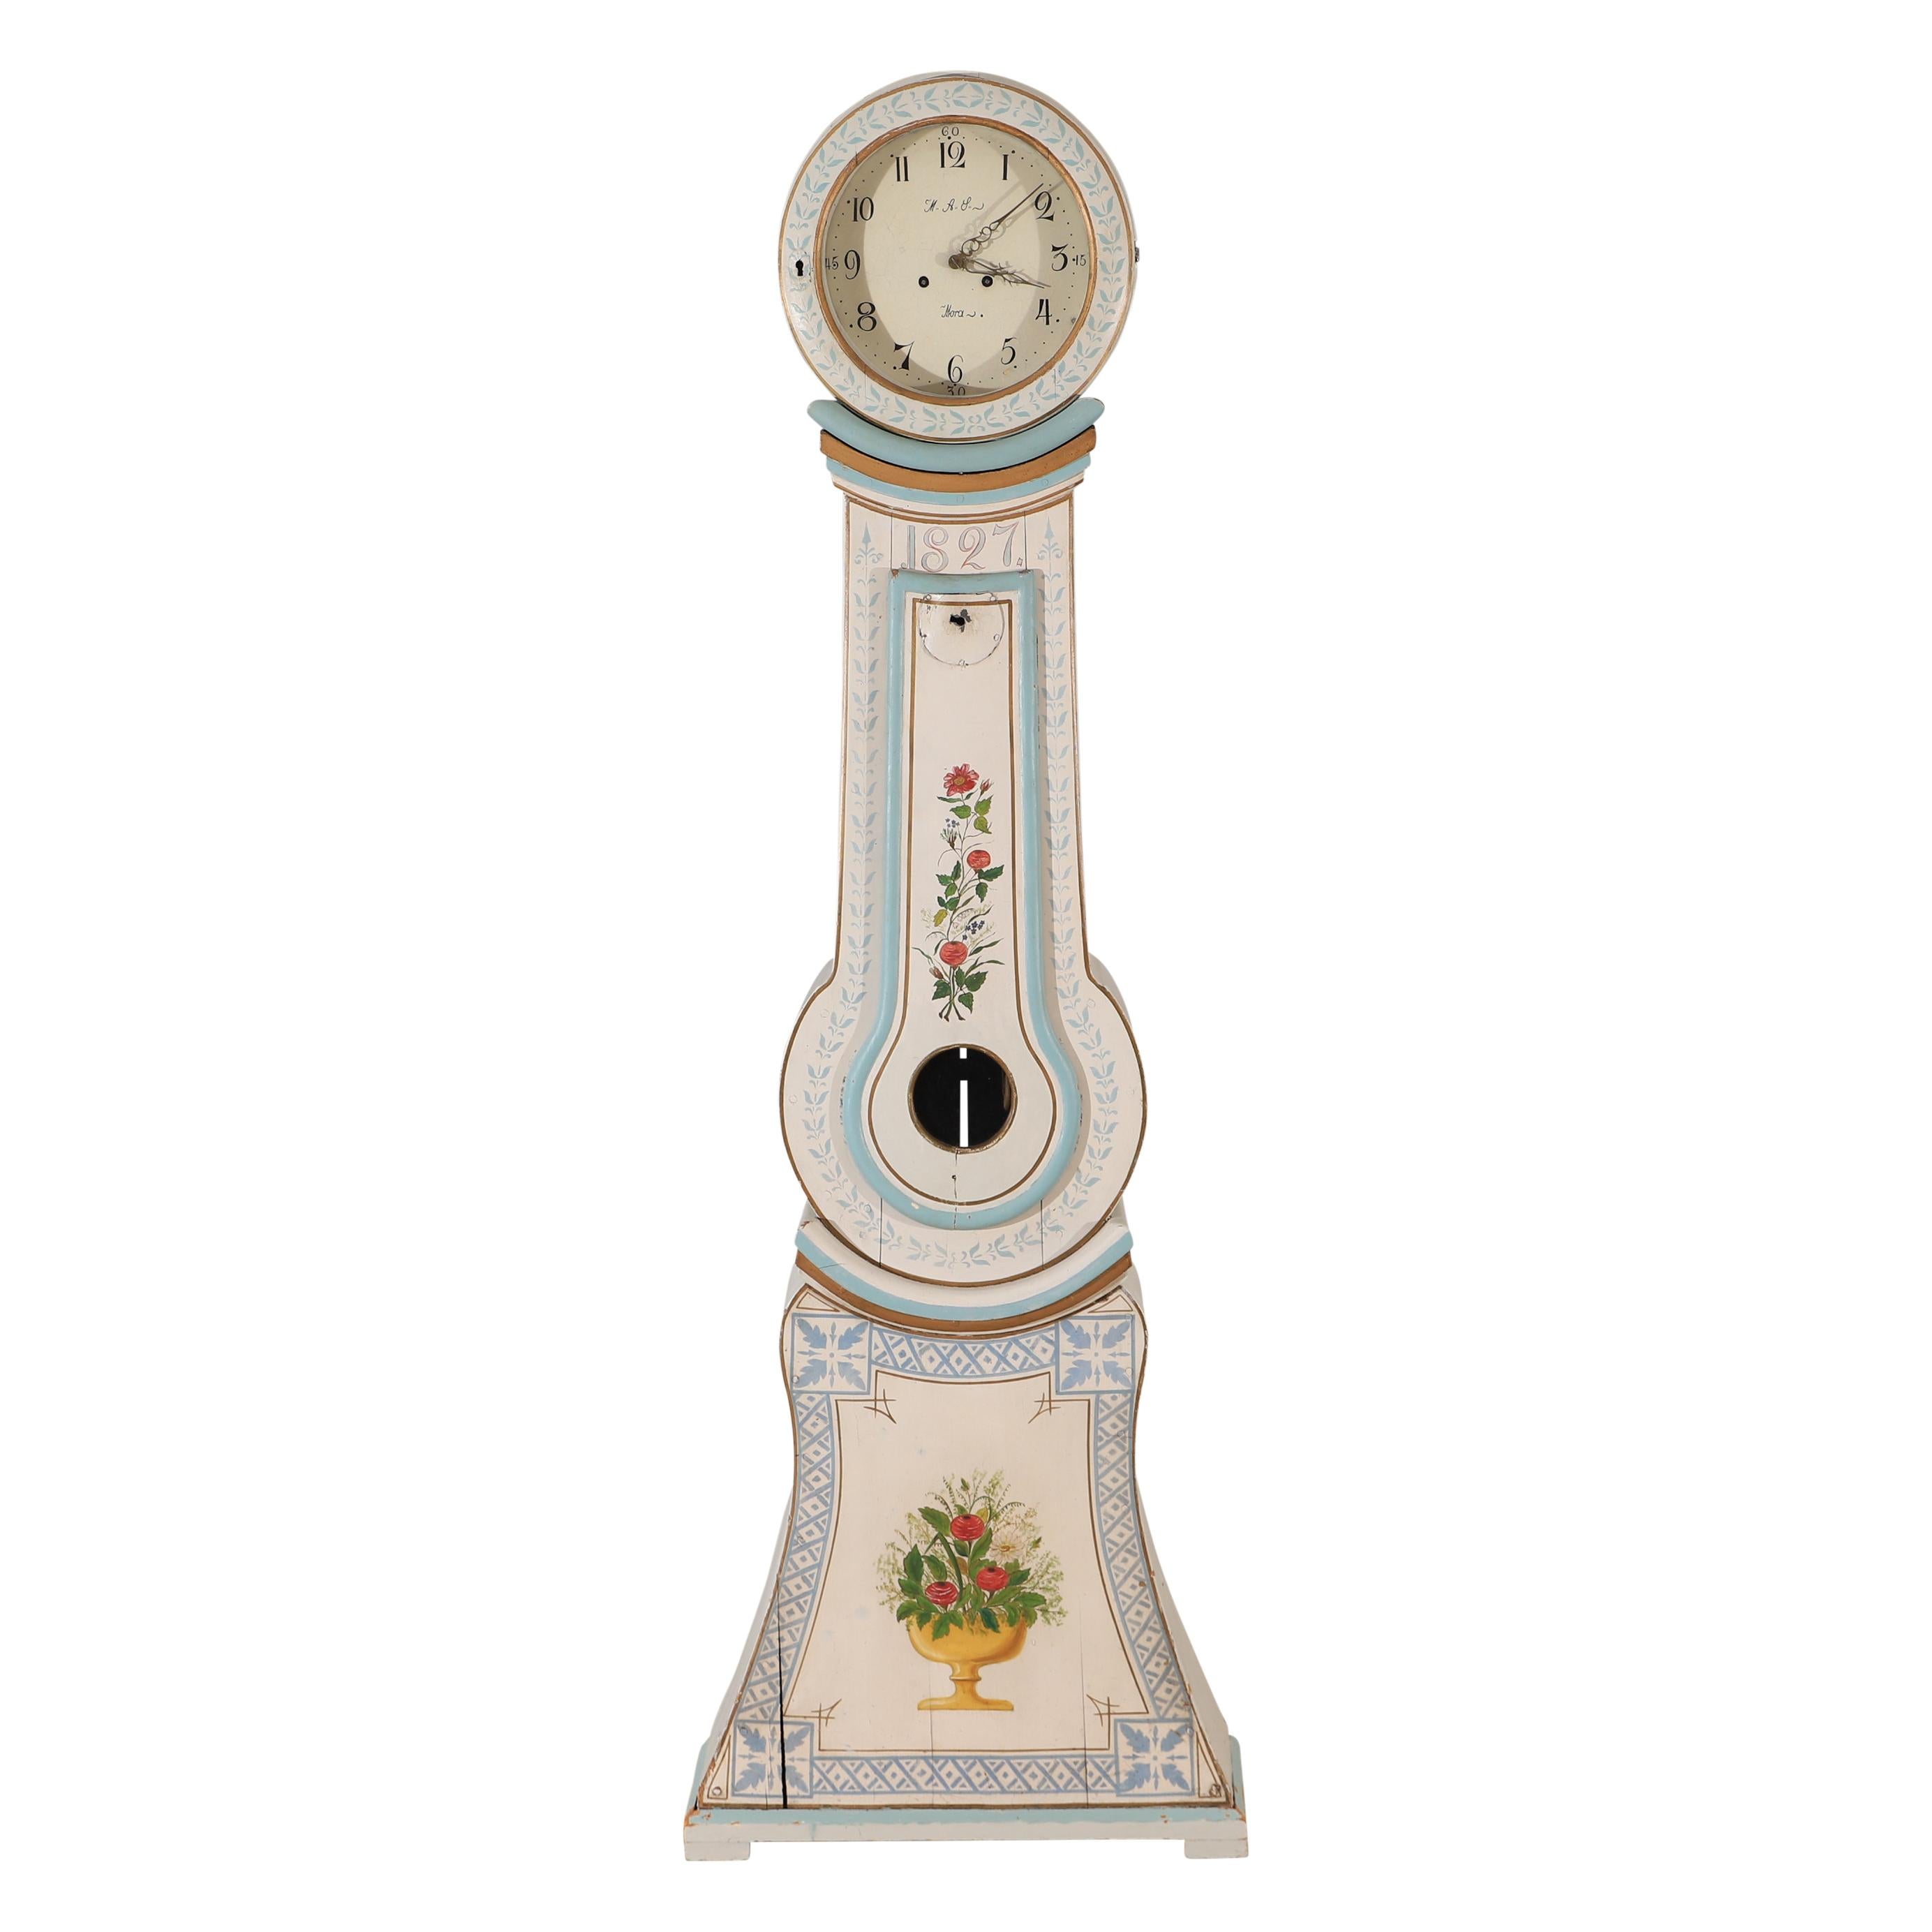 Antique Swedish Mora Clock date 1827 with decorative painted floral details. Face detailed with clockmakers initials AAL and Mora. Iriginal mechanism with weights and pendulum. Not function tested. 
Measures: Width:68cm / 26.8